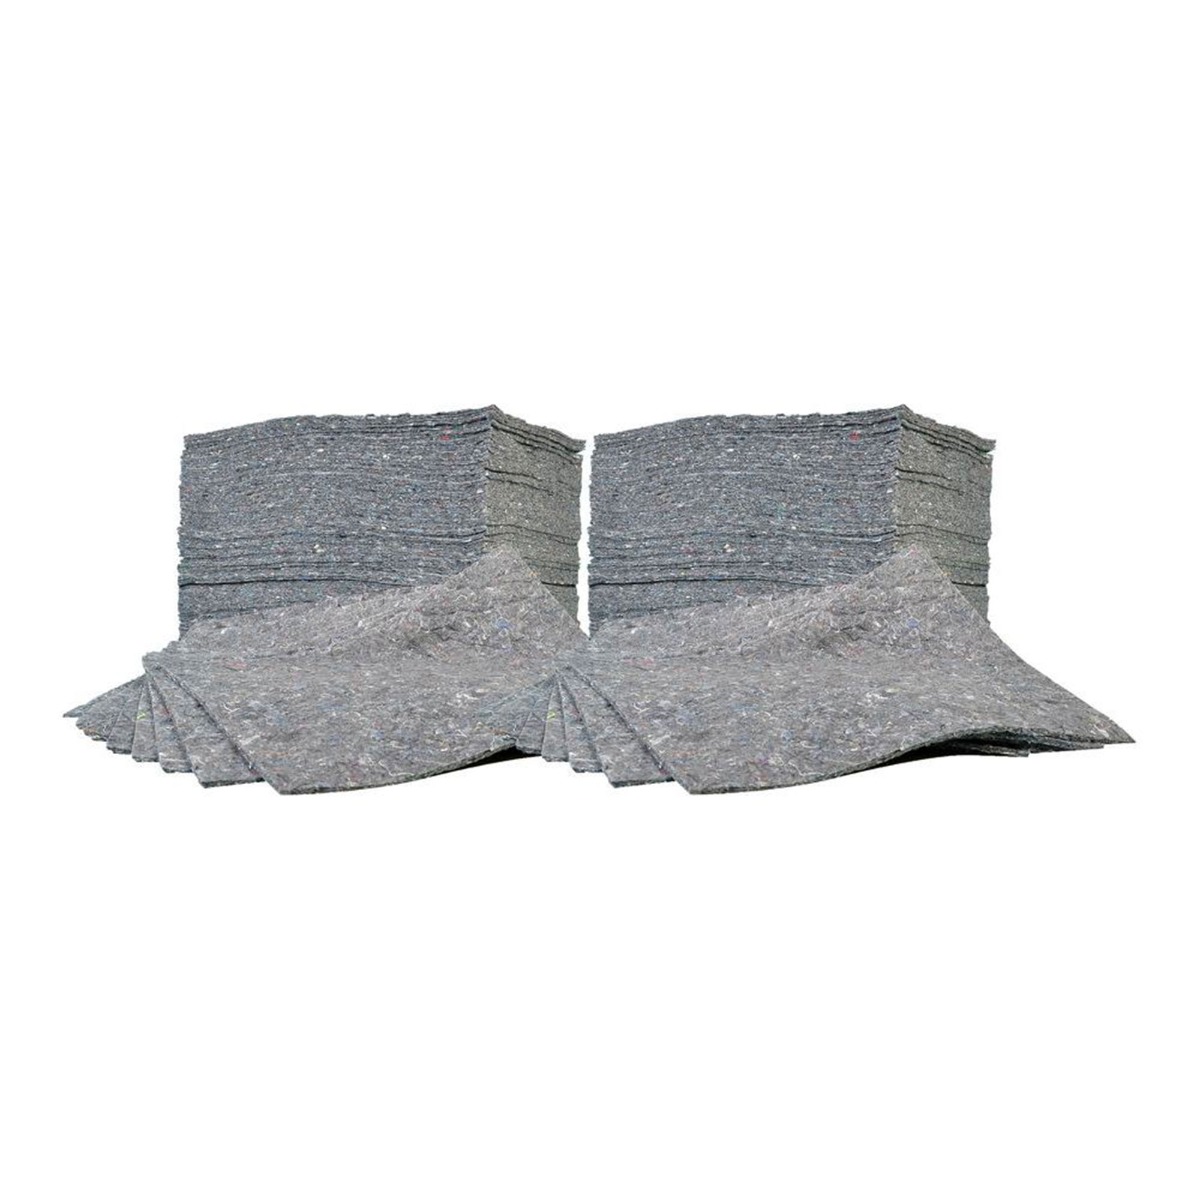 SpillPod Pads - Absorbs 78L - 31 x 39 x 1cm - Poly-Wrapped